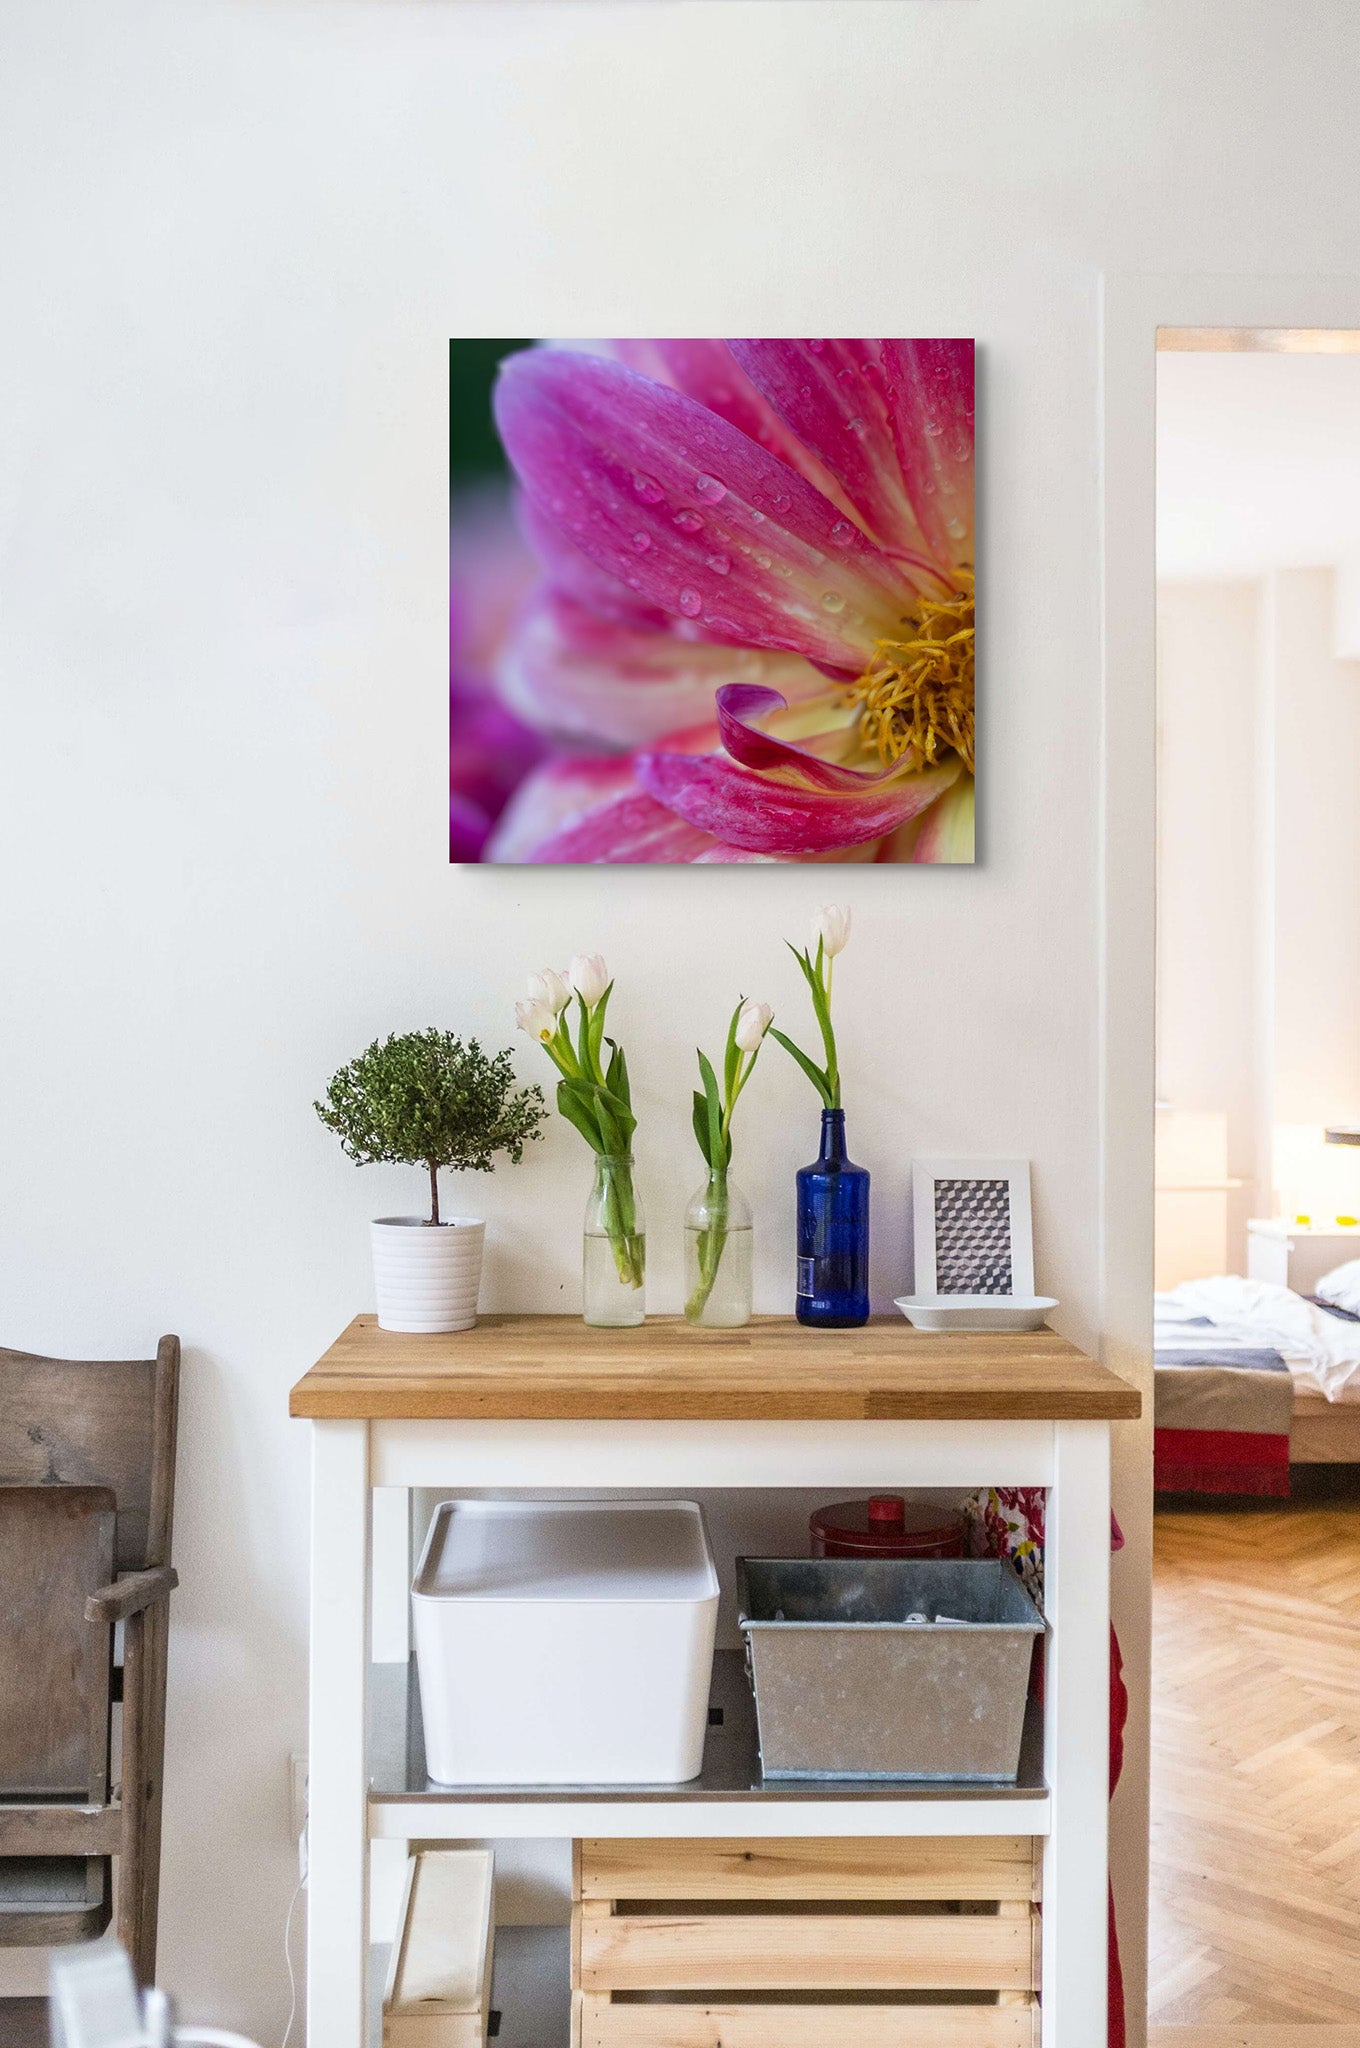 Picture hanging on the wall of a room. It looks like a kitchen. There is a wooden cart with flowers in vases. The picture on the wall is a fine art macro photograph of a pink Dahlia flower by Cameron Dreaux. 